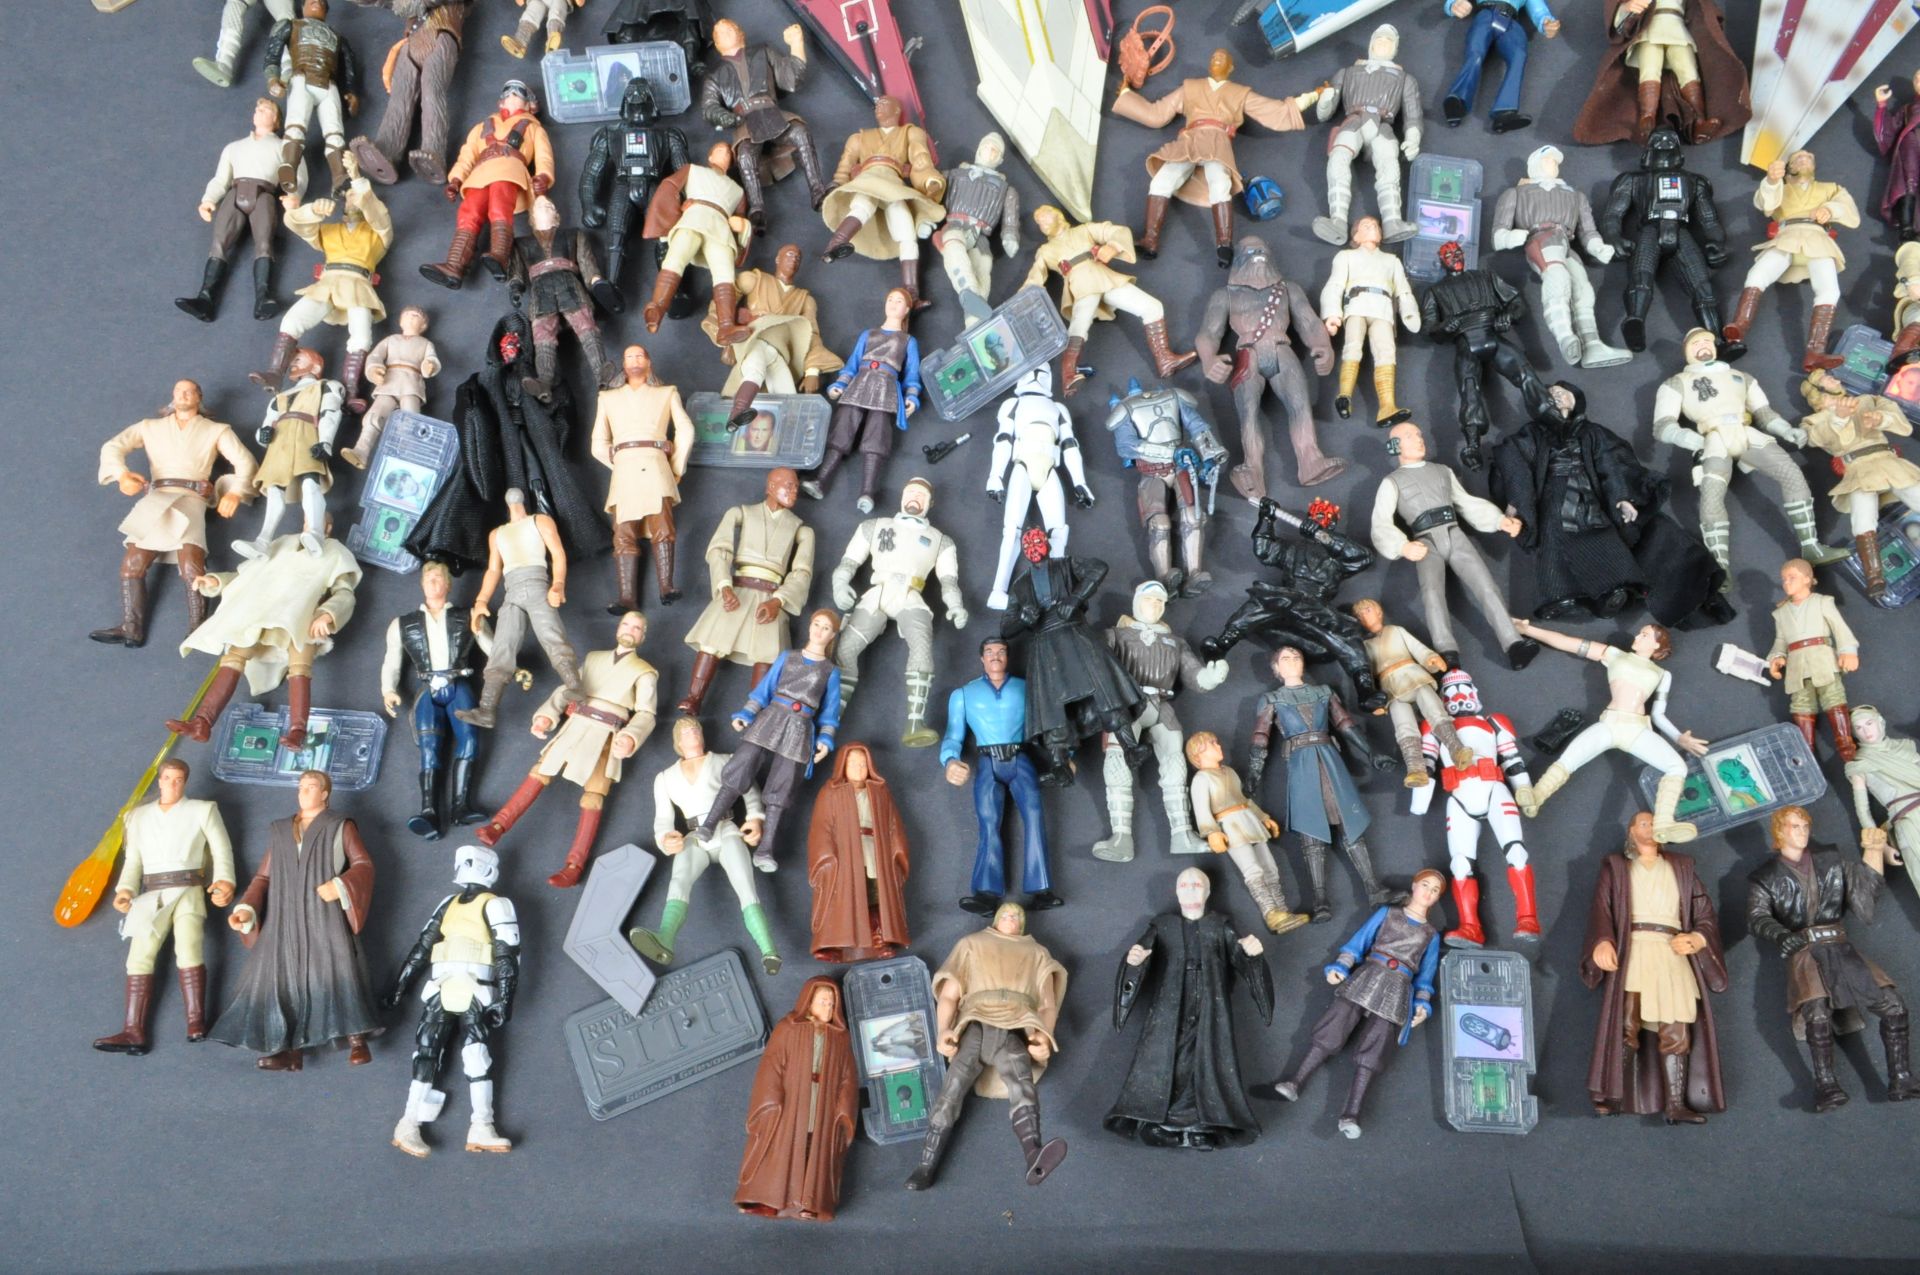 STAR WARS - LARGE COLLECTION KENNER / HASBRO CLONE WARS & OTHER FIGURES - Image 2 of 10